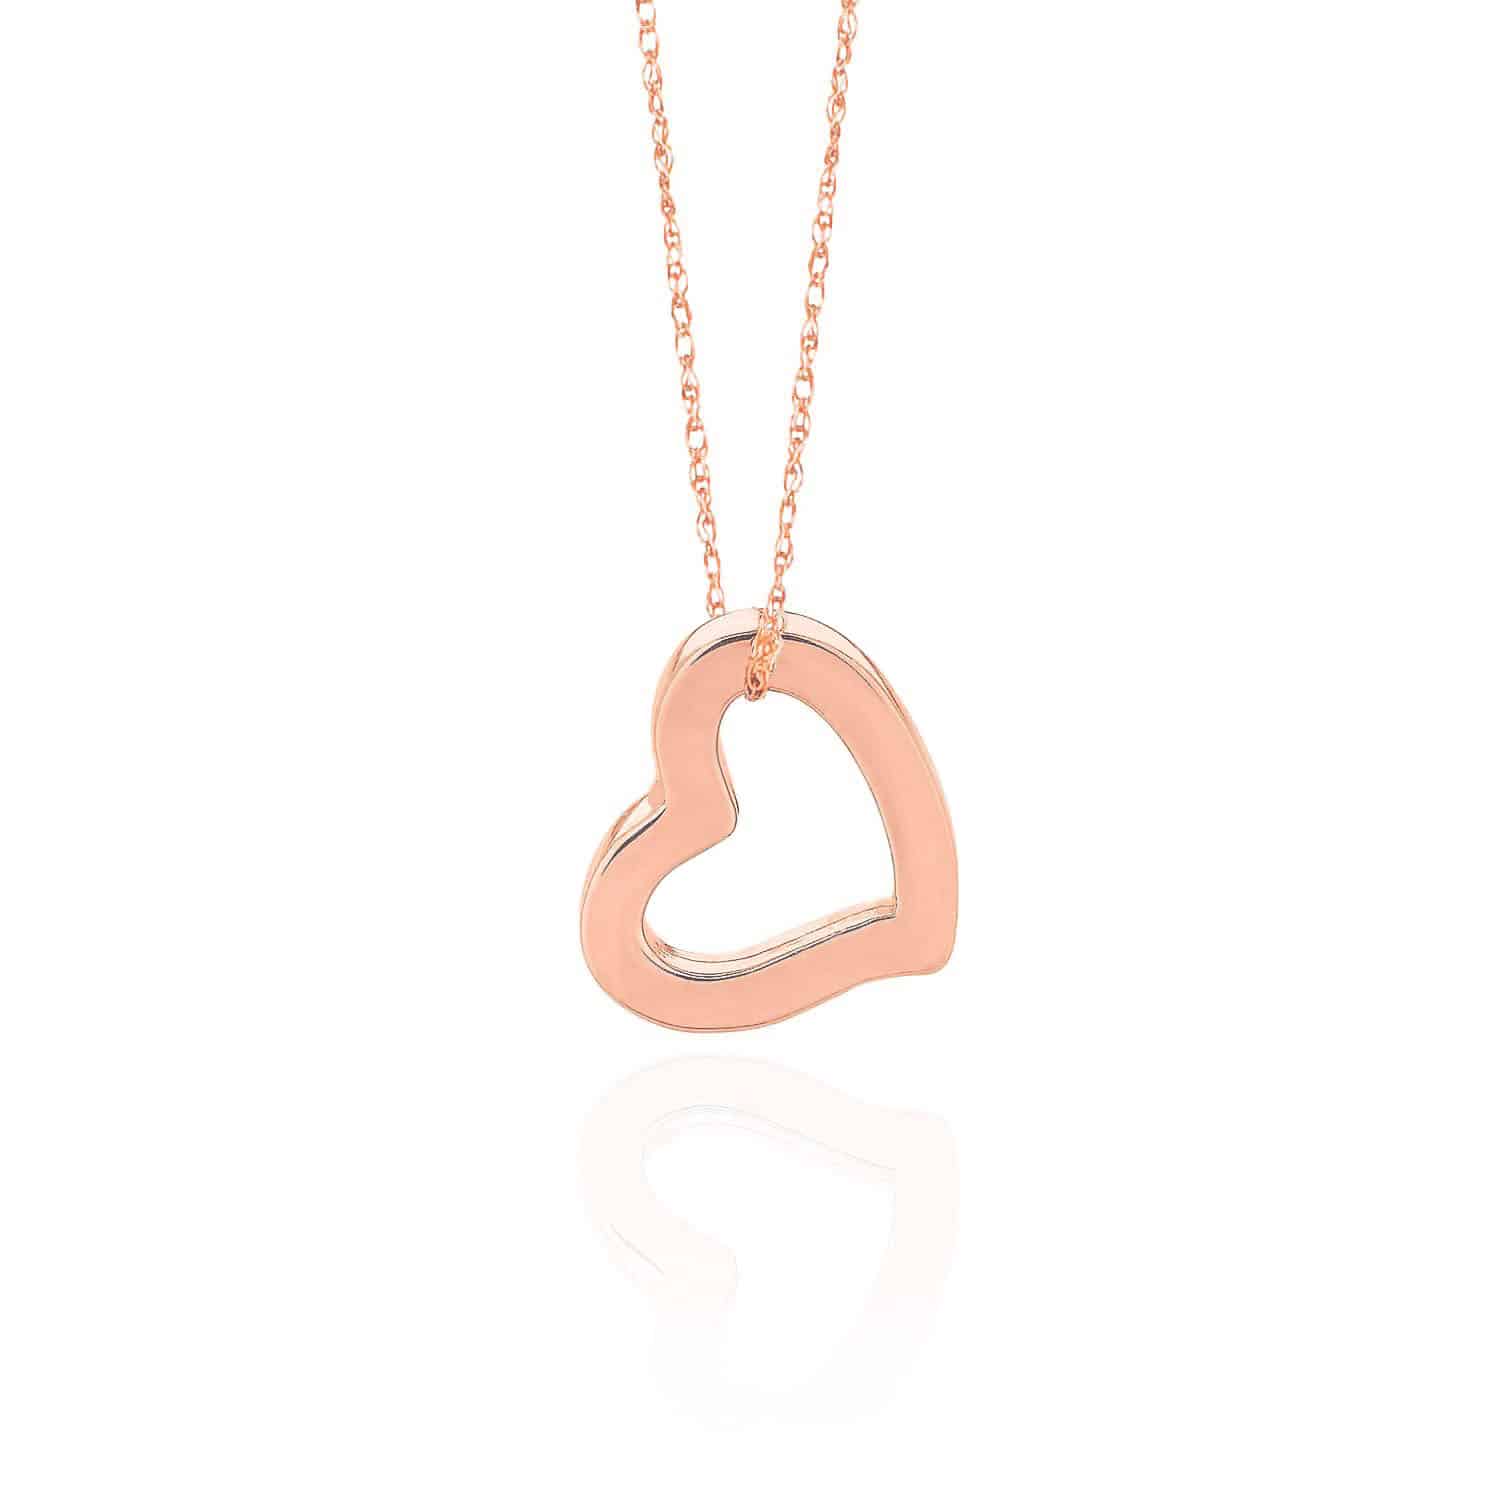 14K Yellow, White, Rose Gold Rope Open Heart Pendant Necklace 18" - Rose Gold